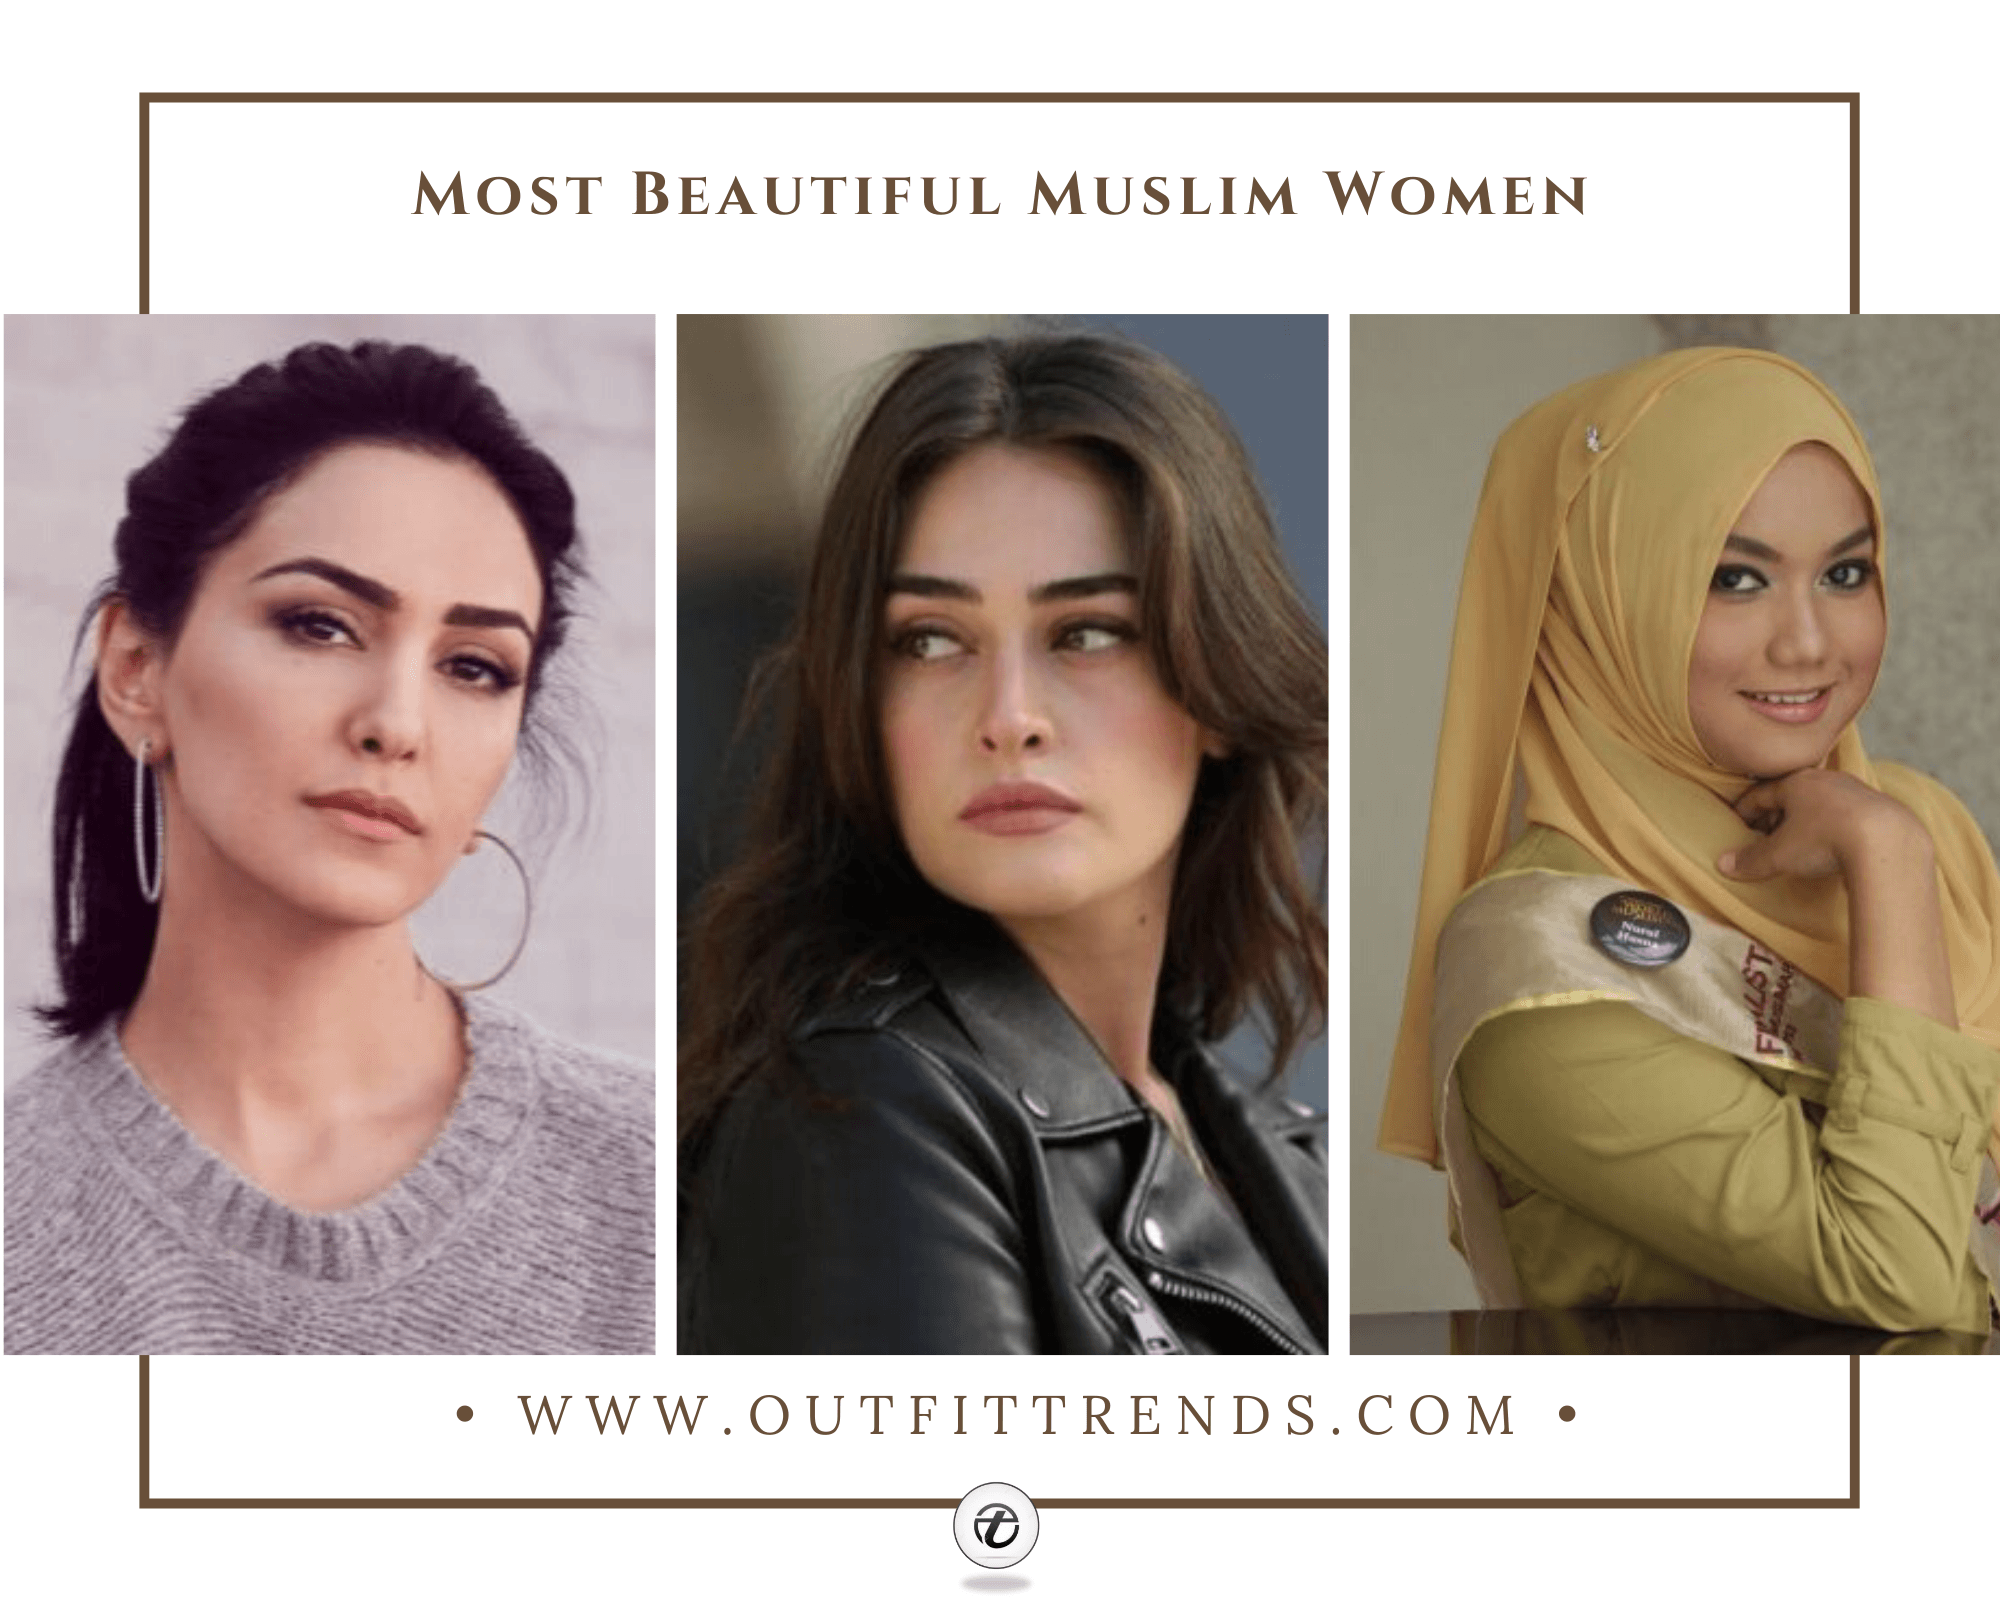 35 Most Beautiful Muslim Girls In World-2021 List & Pictures